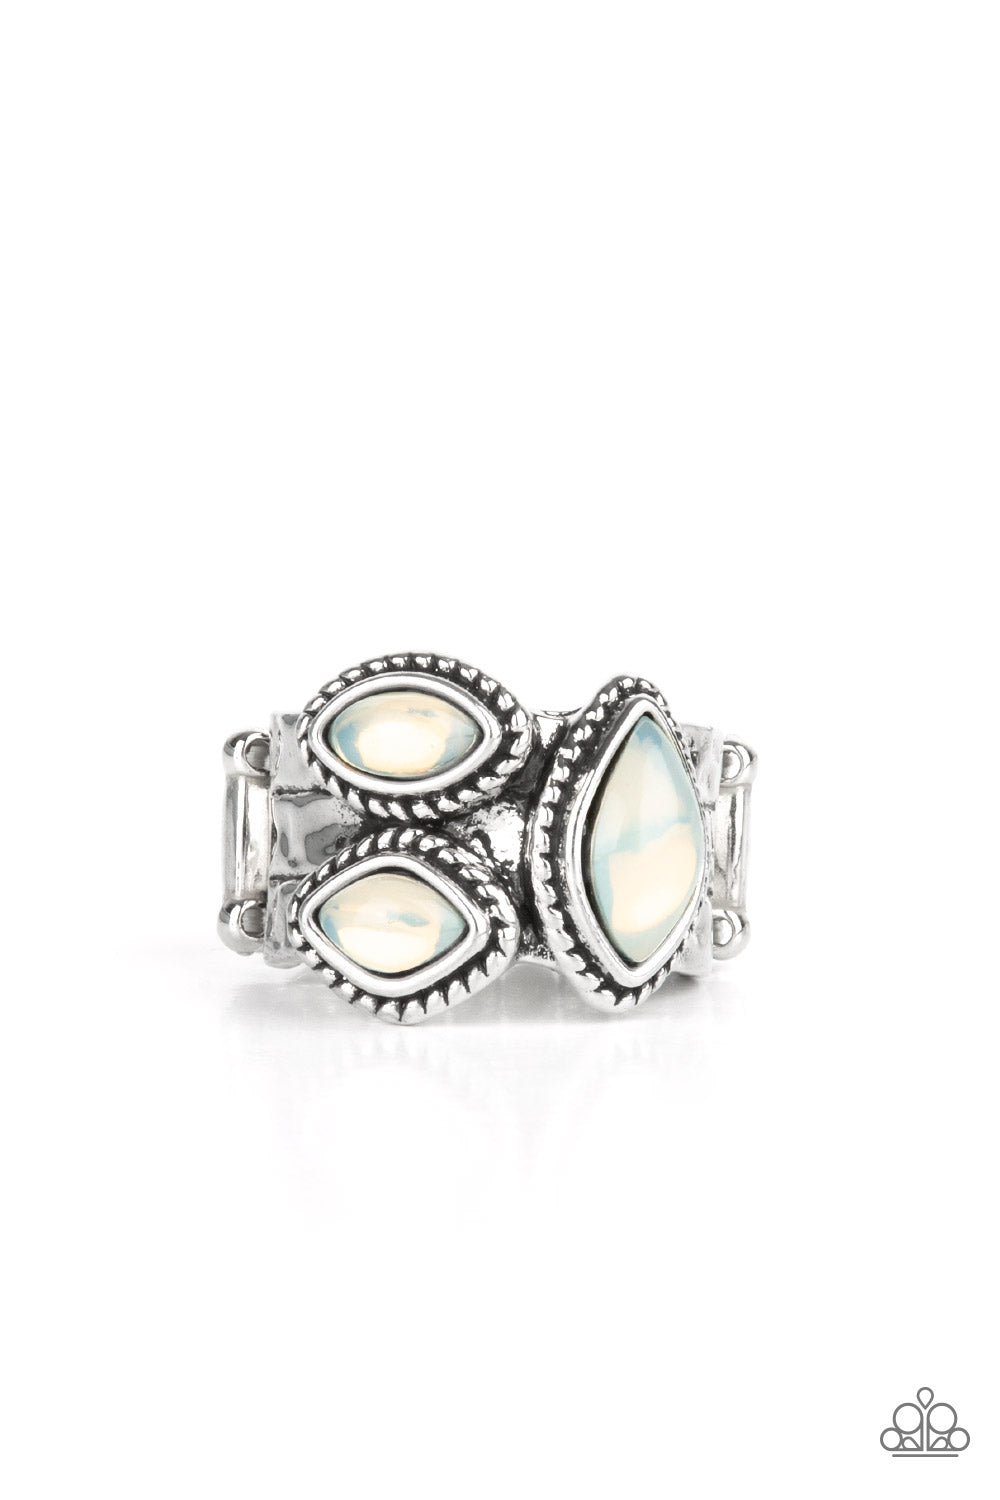 The Charisma Collector - Iridescent White - Paparazzi Ring